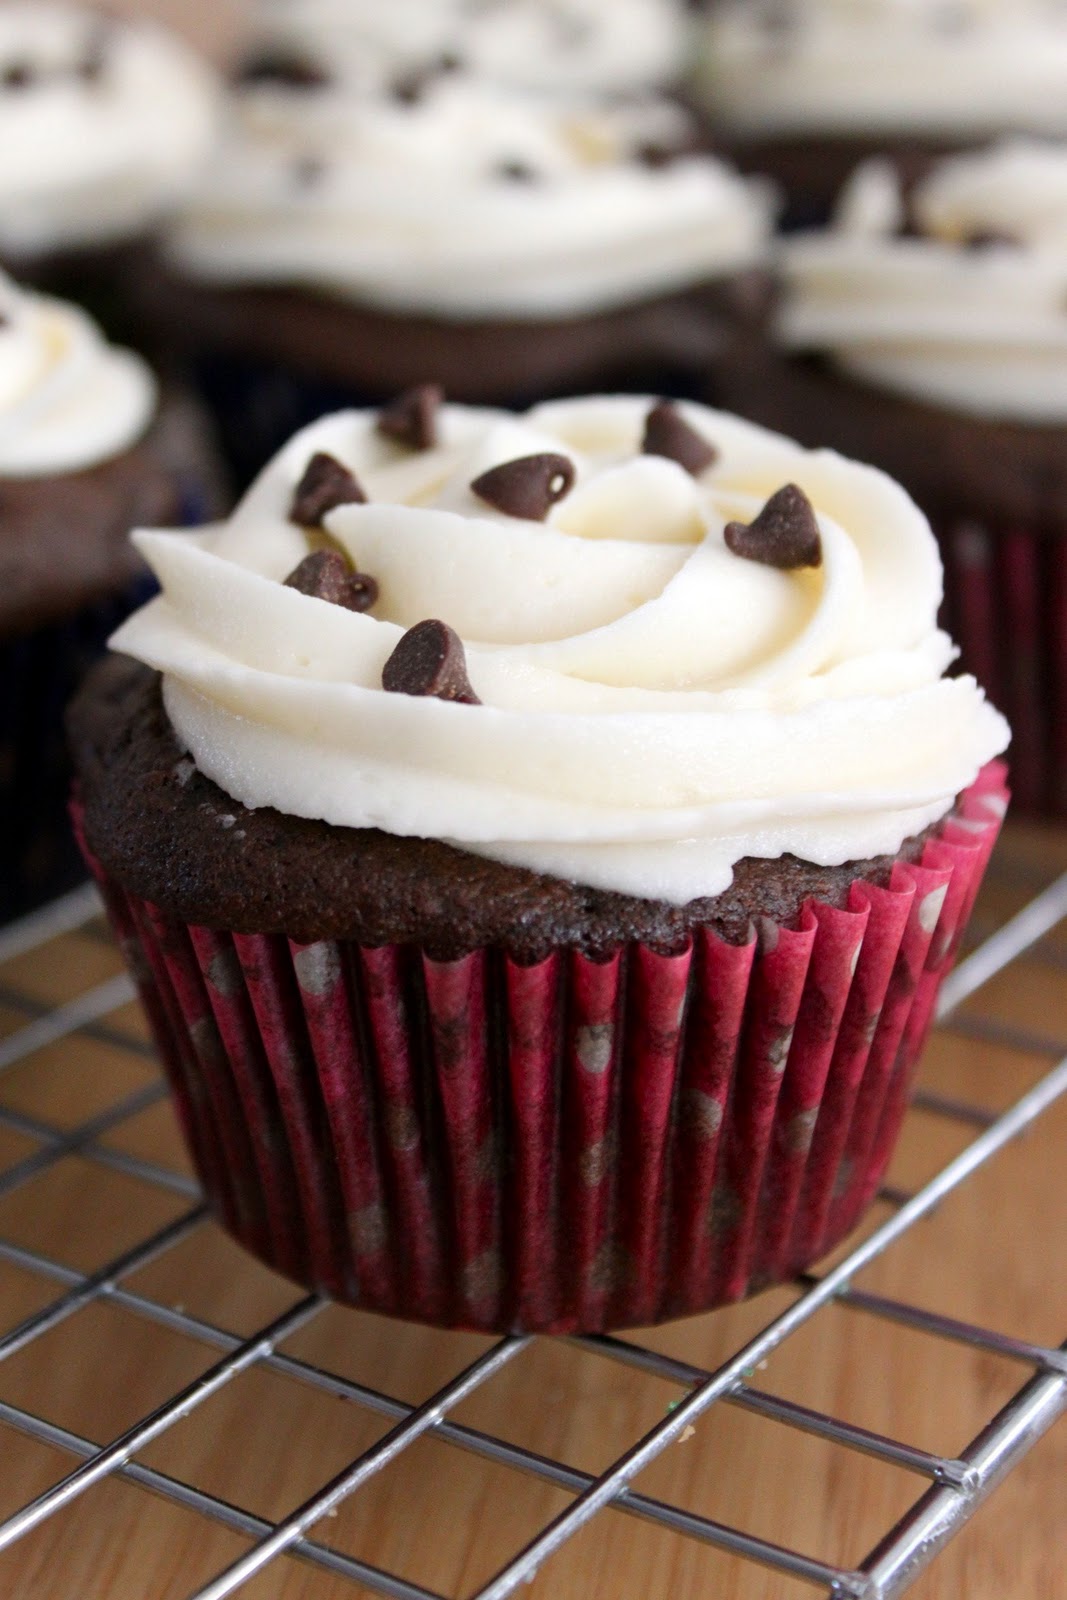 Baked Perfection: Chocolate Cupcakes with Vanilla Frosting